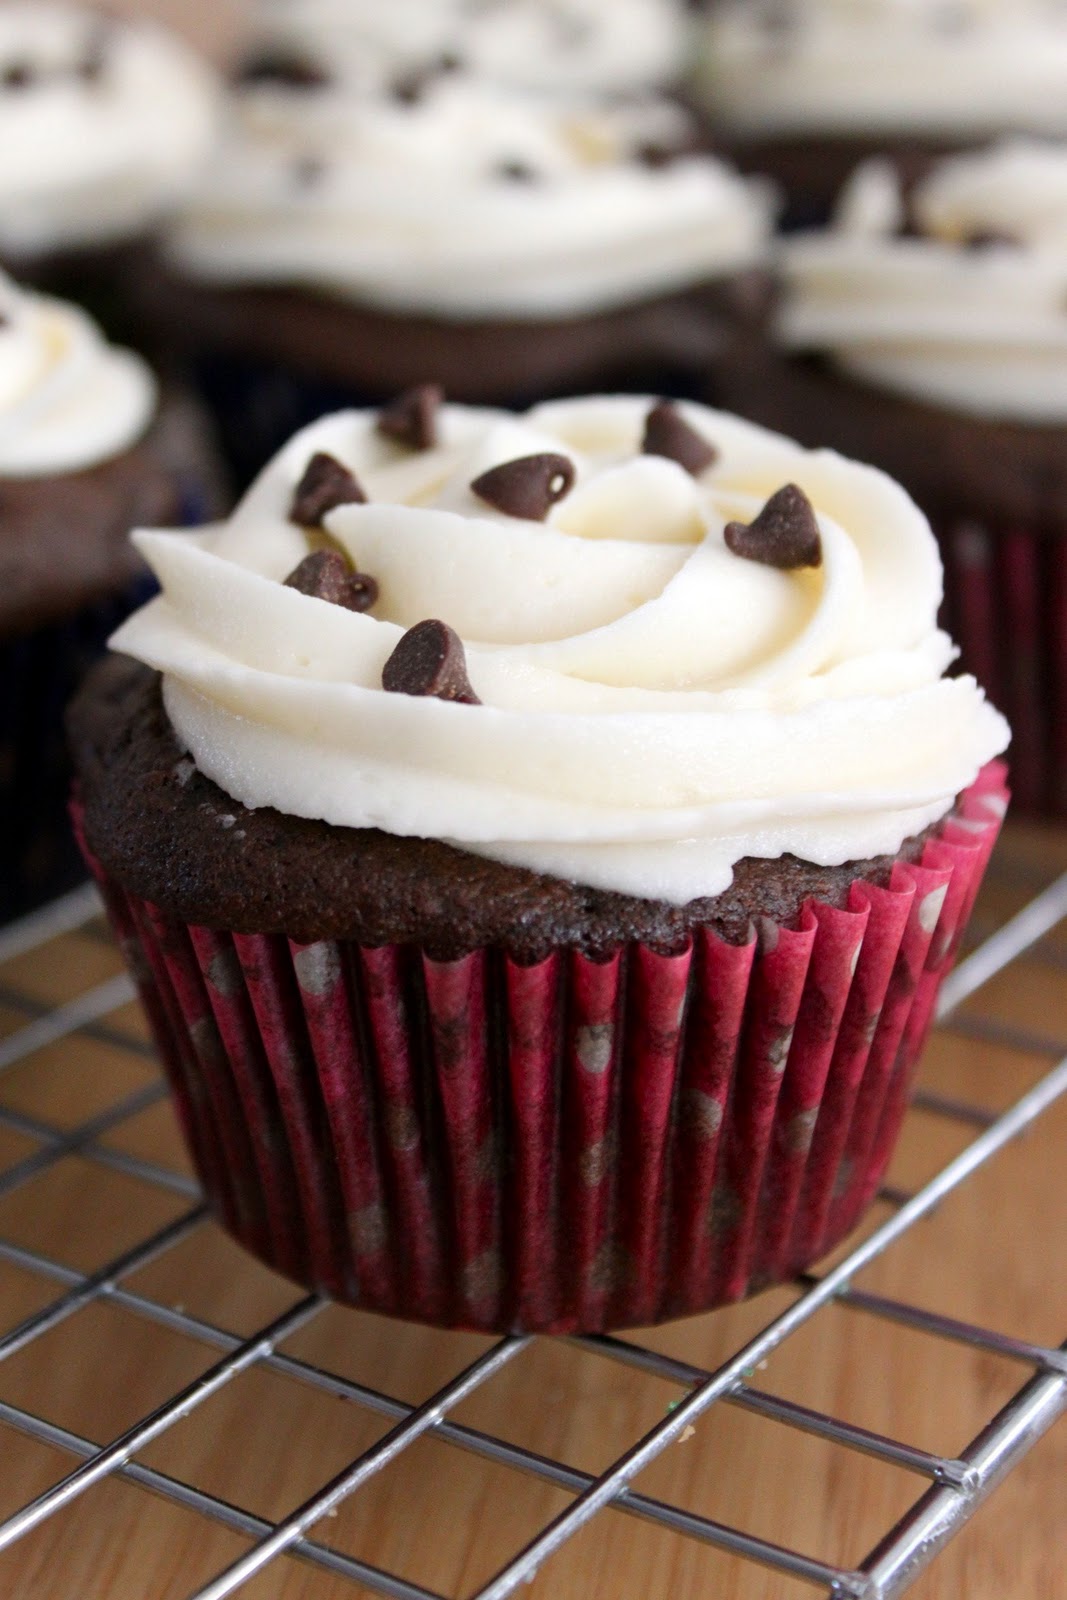 Baked Perfection: Chocolate Cupcakes with Vanilla Frosting